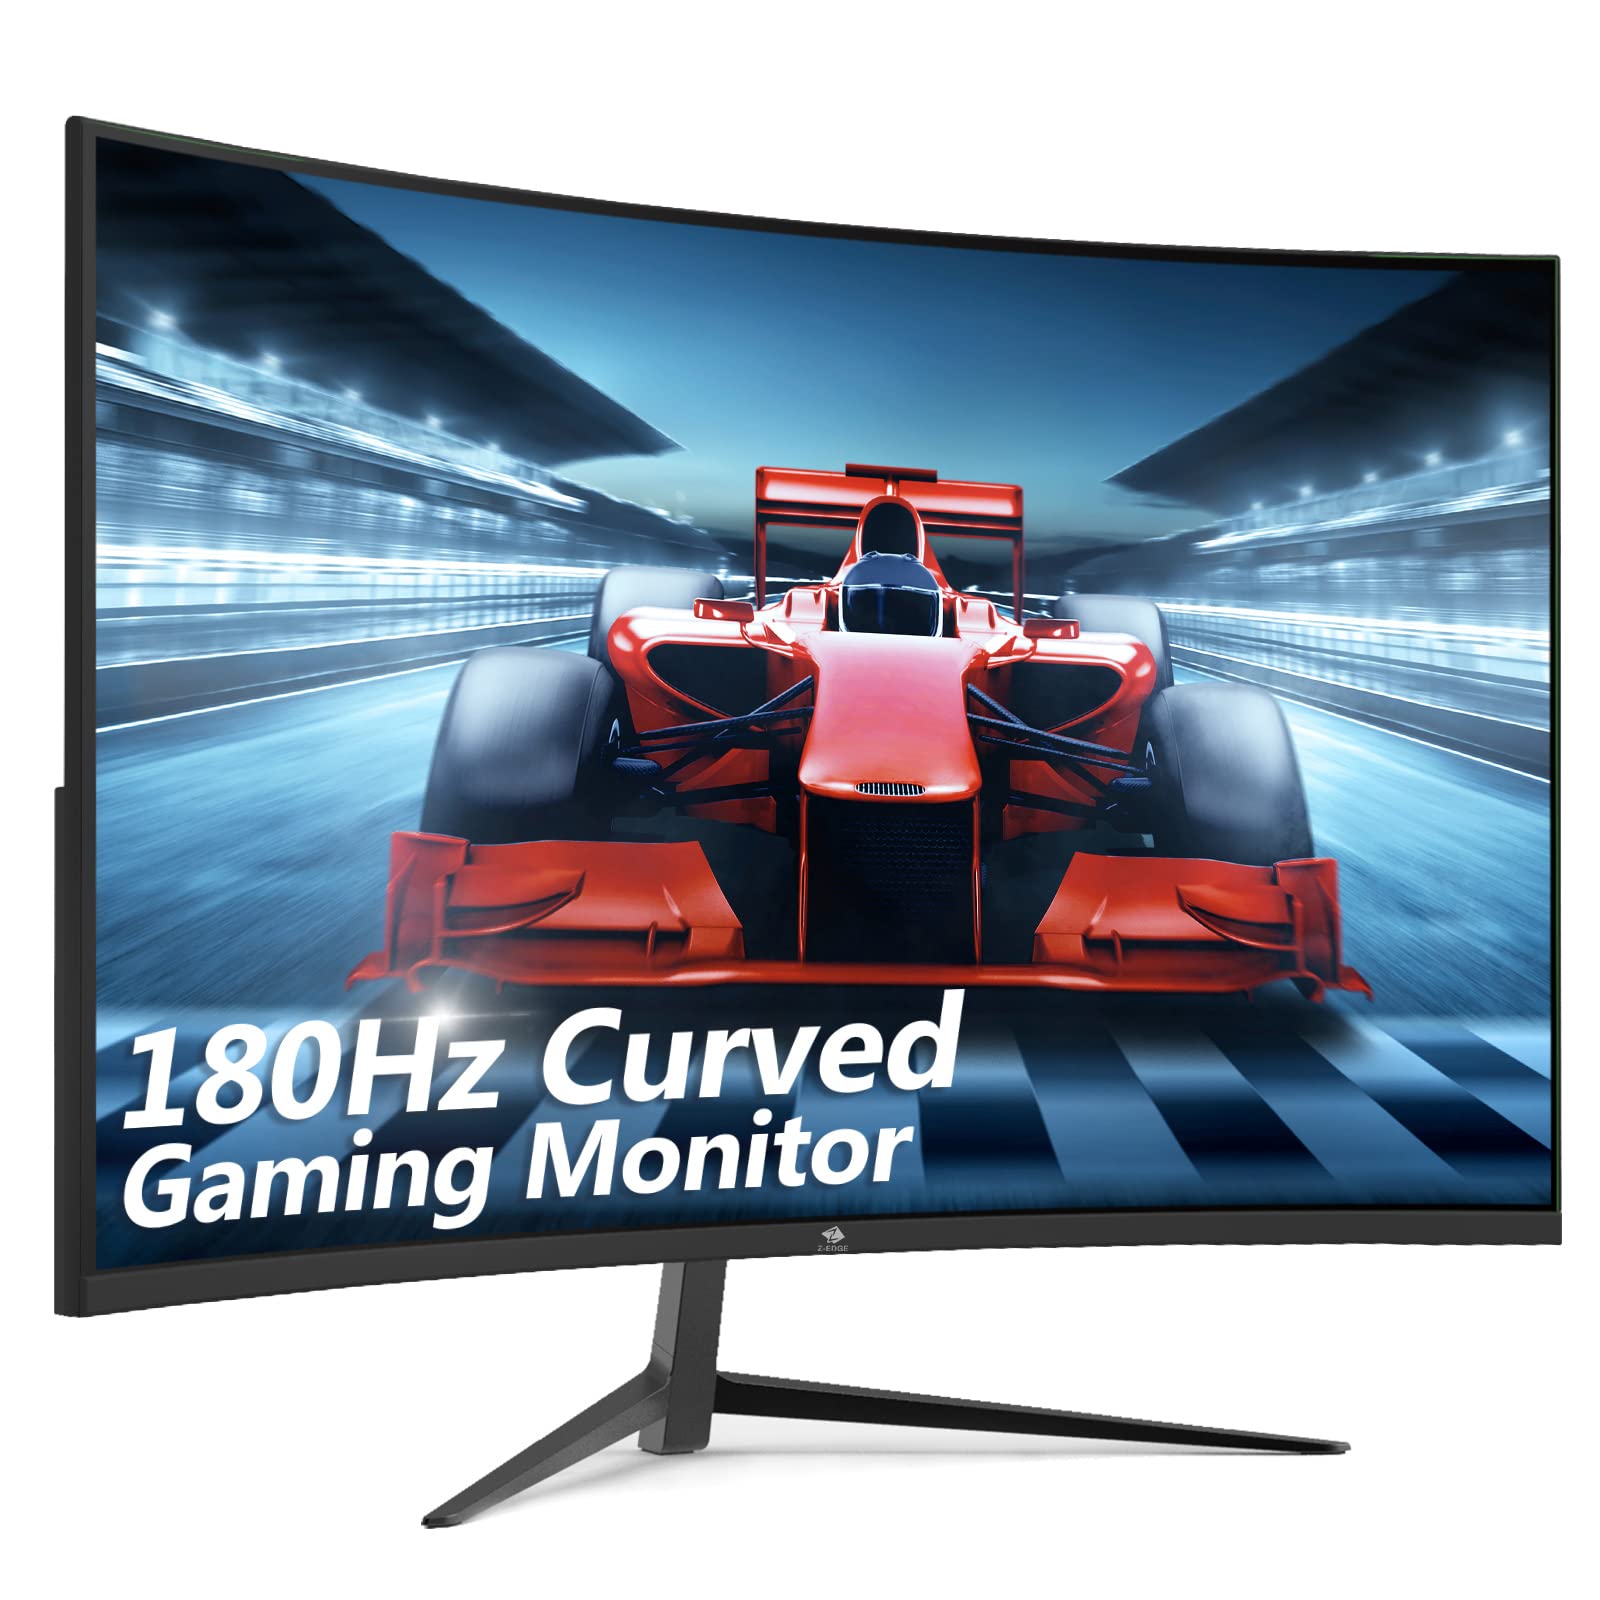 Z Z-Edge Z-Edge UG24 24-inch Curved Gaming Monitor 180Hz Refresh Rate, 1ms MPRT, FHD 1080 Gaming Monitor, R1650 Curved, AMD Freesync Premium Display